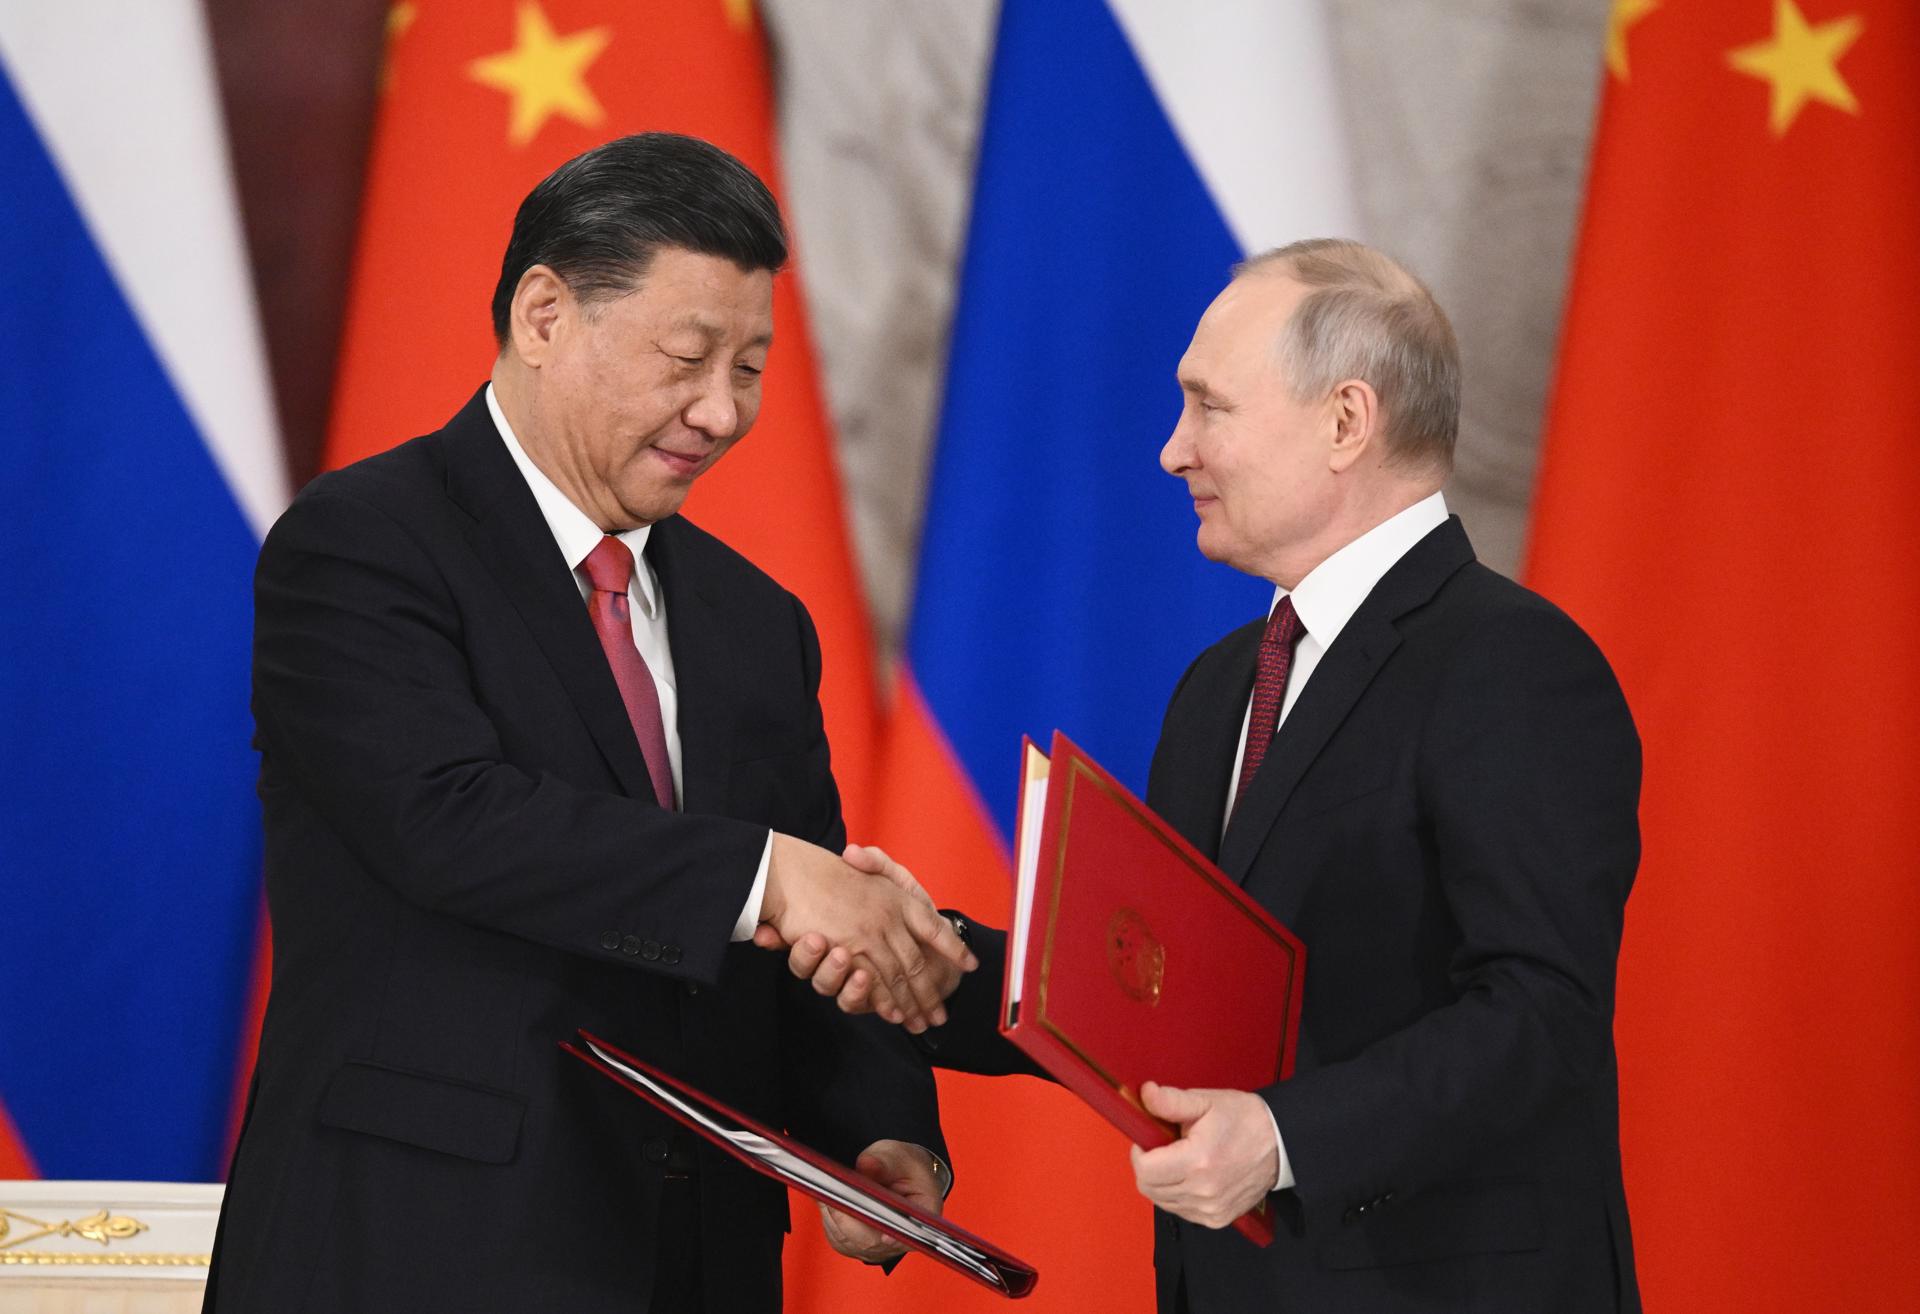 Chinese President Xi Jinping (L) and Russian President Vladimir Putin (R) attend the signing ceremony of documents concerning the further development of the comprehensive partnership and strategic cooperation between Russia and China, at the Kremlin, in Moscow, Russia, 21 March 2023. EFE-EPA/VLADIMIR ASTAPKOVICH / SPUTNIK / KREMLIN POOL MANDATORY CREDIT